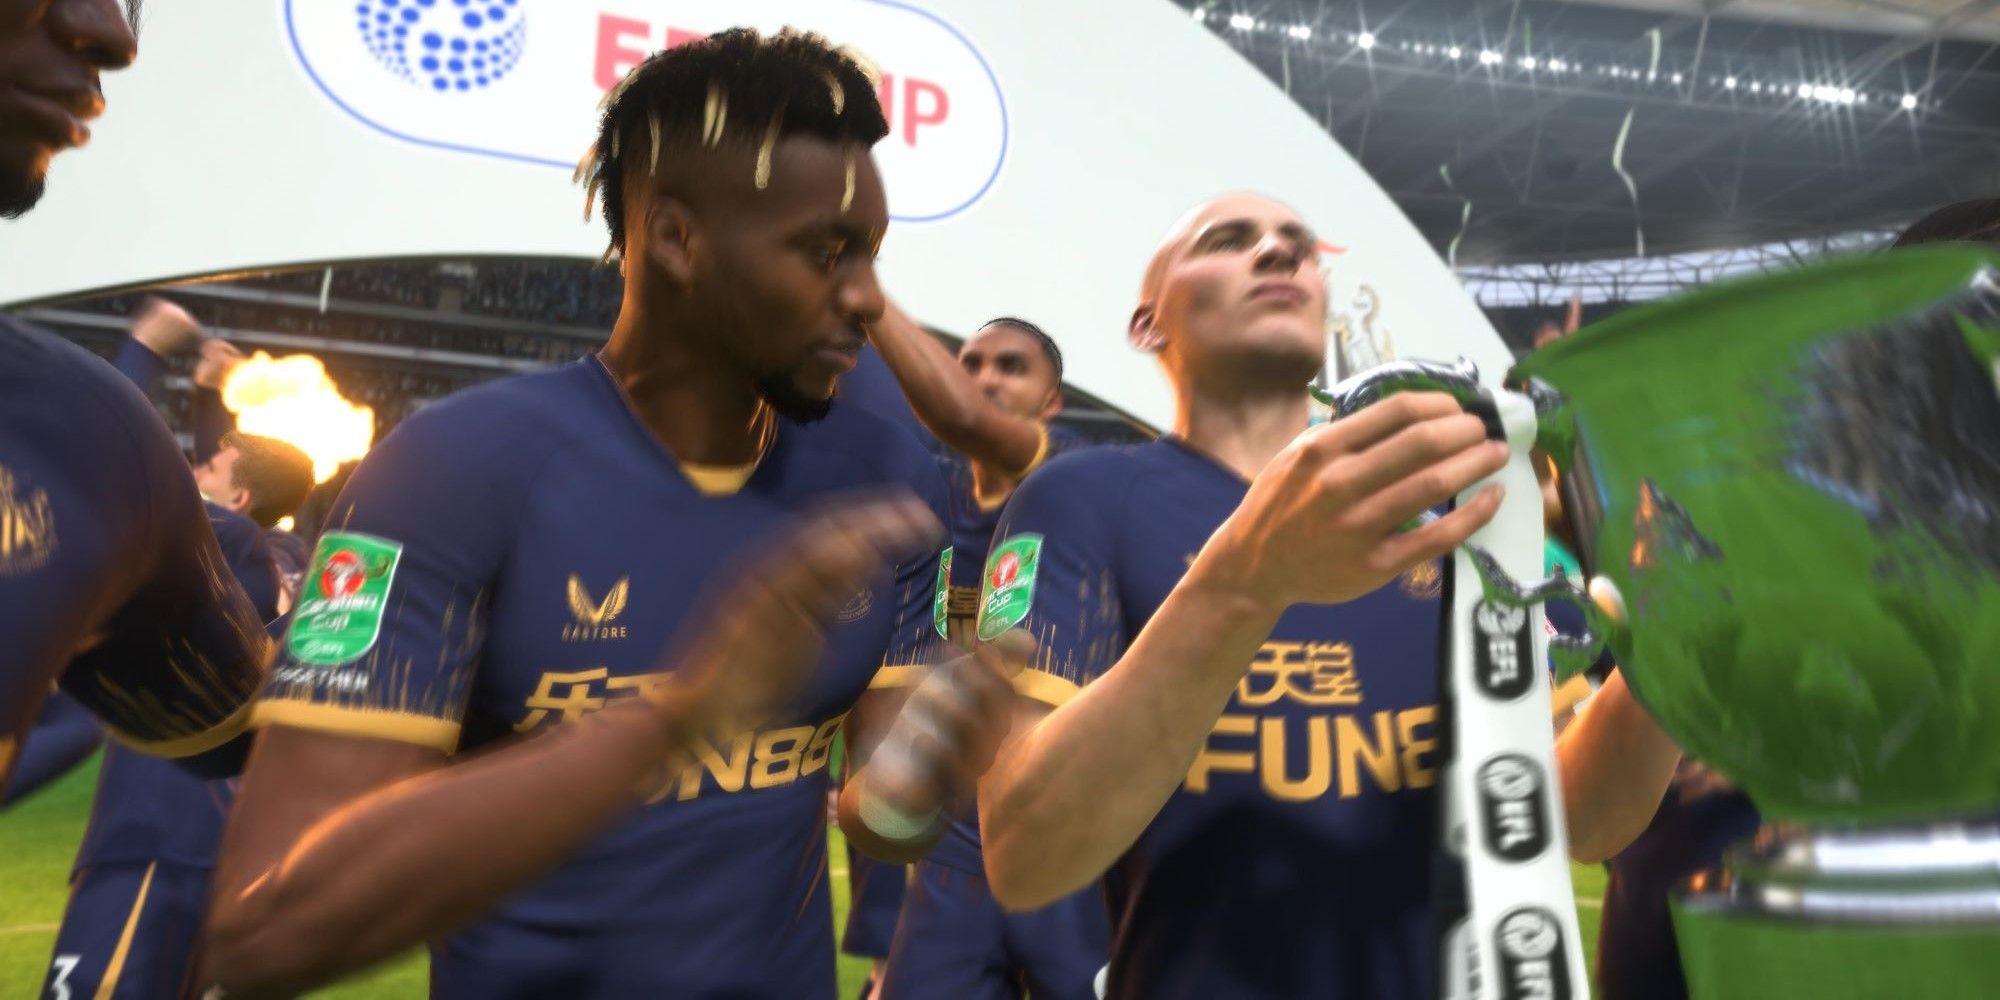 FIFA 23 Newcastle players ASM and Shelvey lifting the League Cup